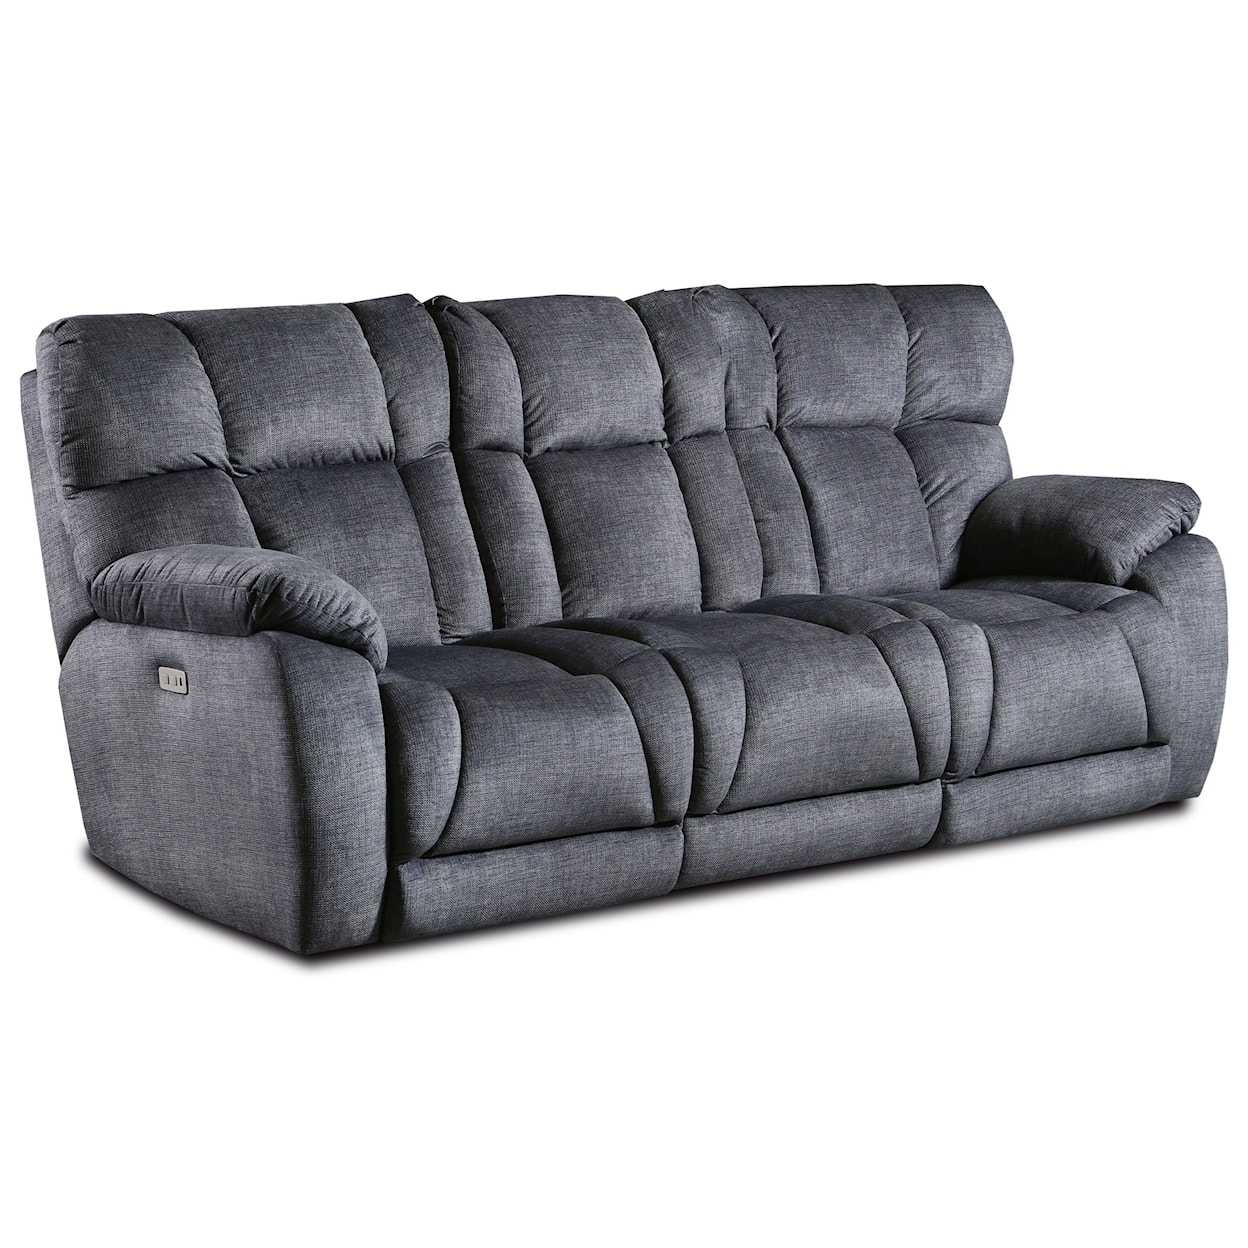 Powell's Motion Wild Card Pwr Hdrest Dble Reclining Sofa